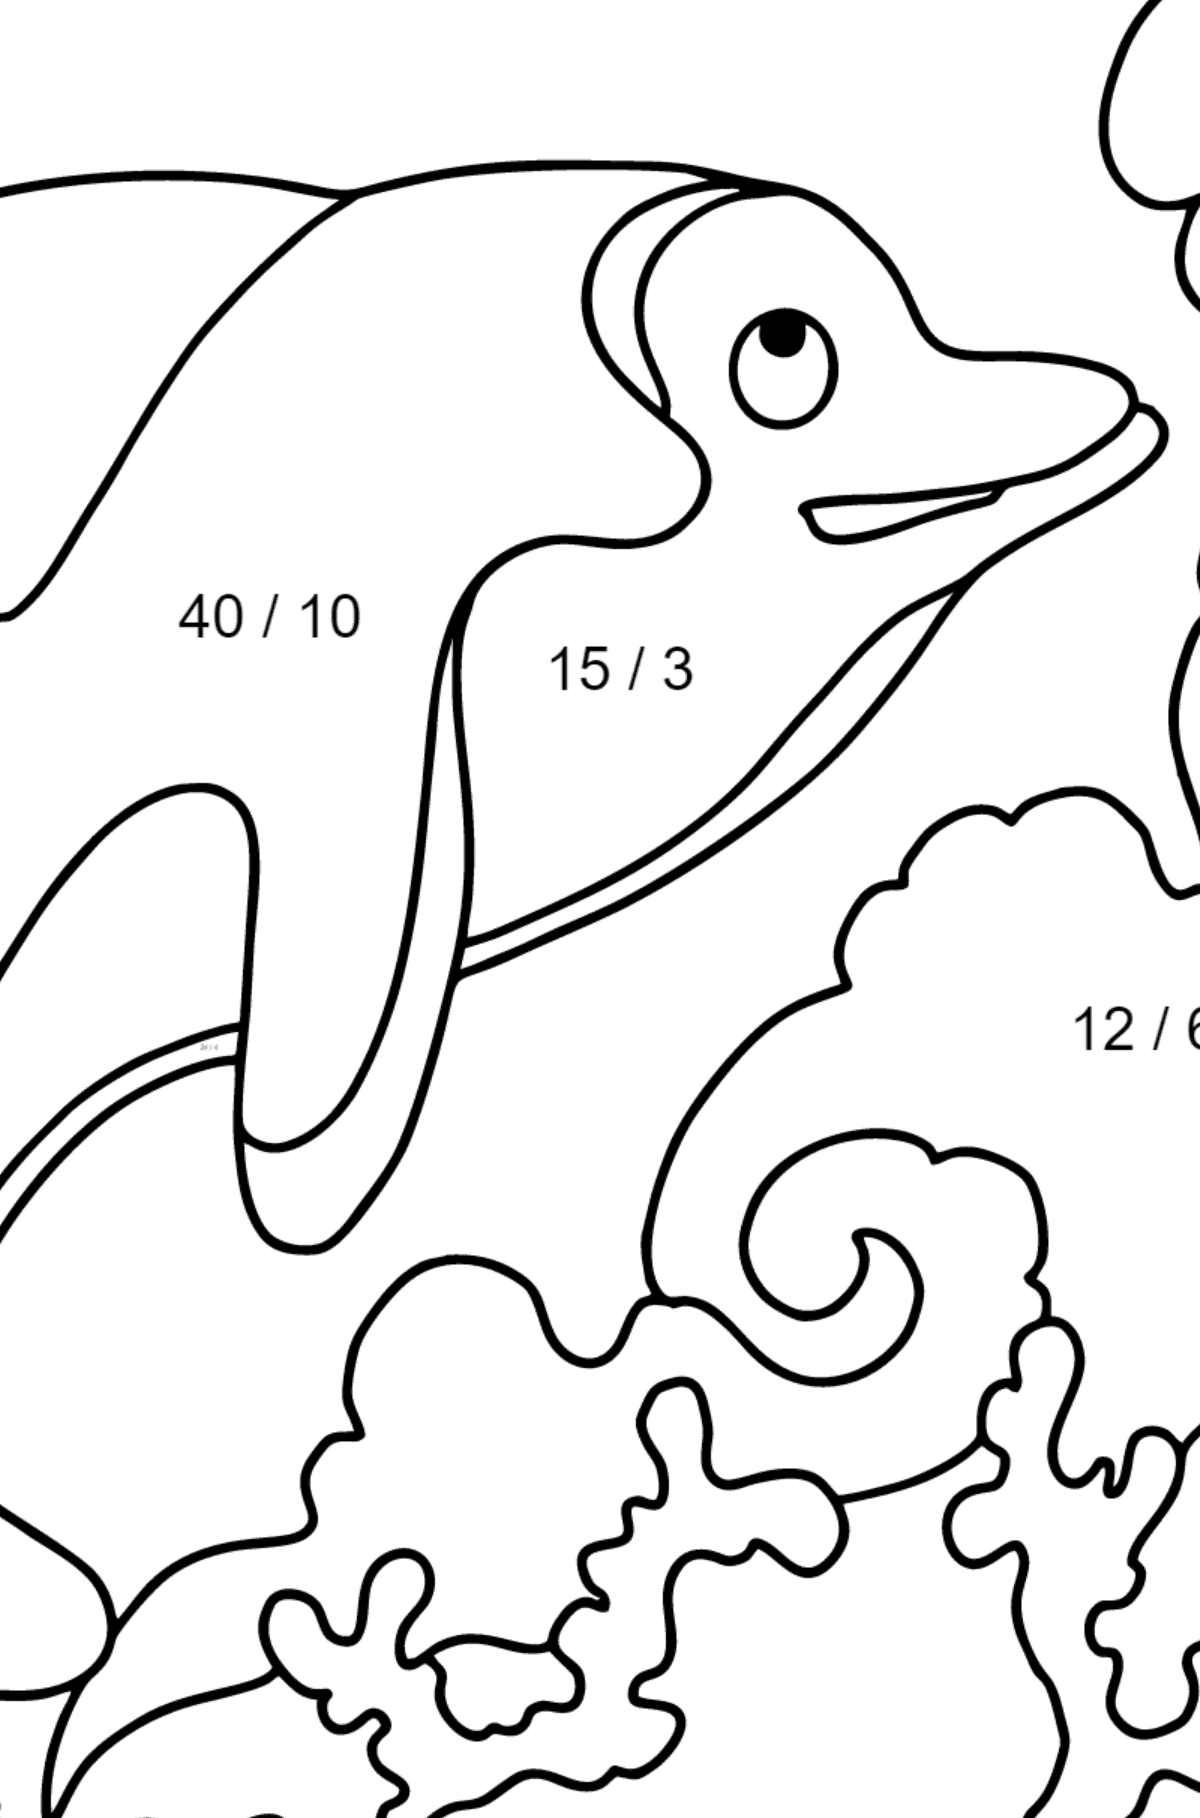 Coloring Page - A Dolphin, a Smart and Friendly Animal - Math Coloring - Division for Kids